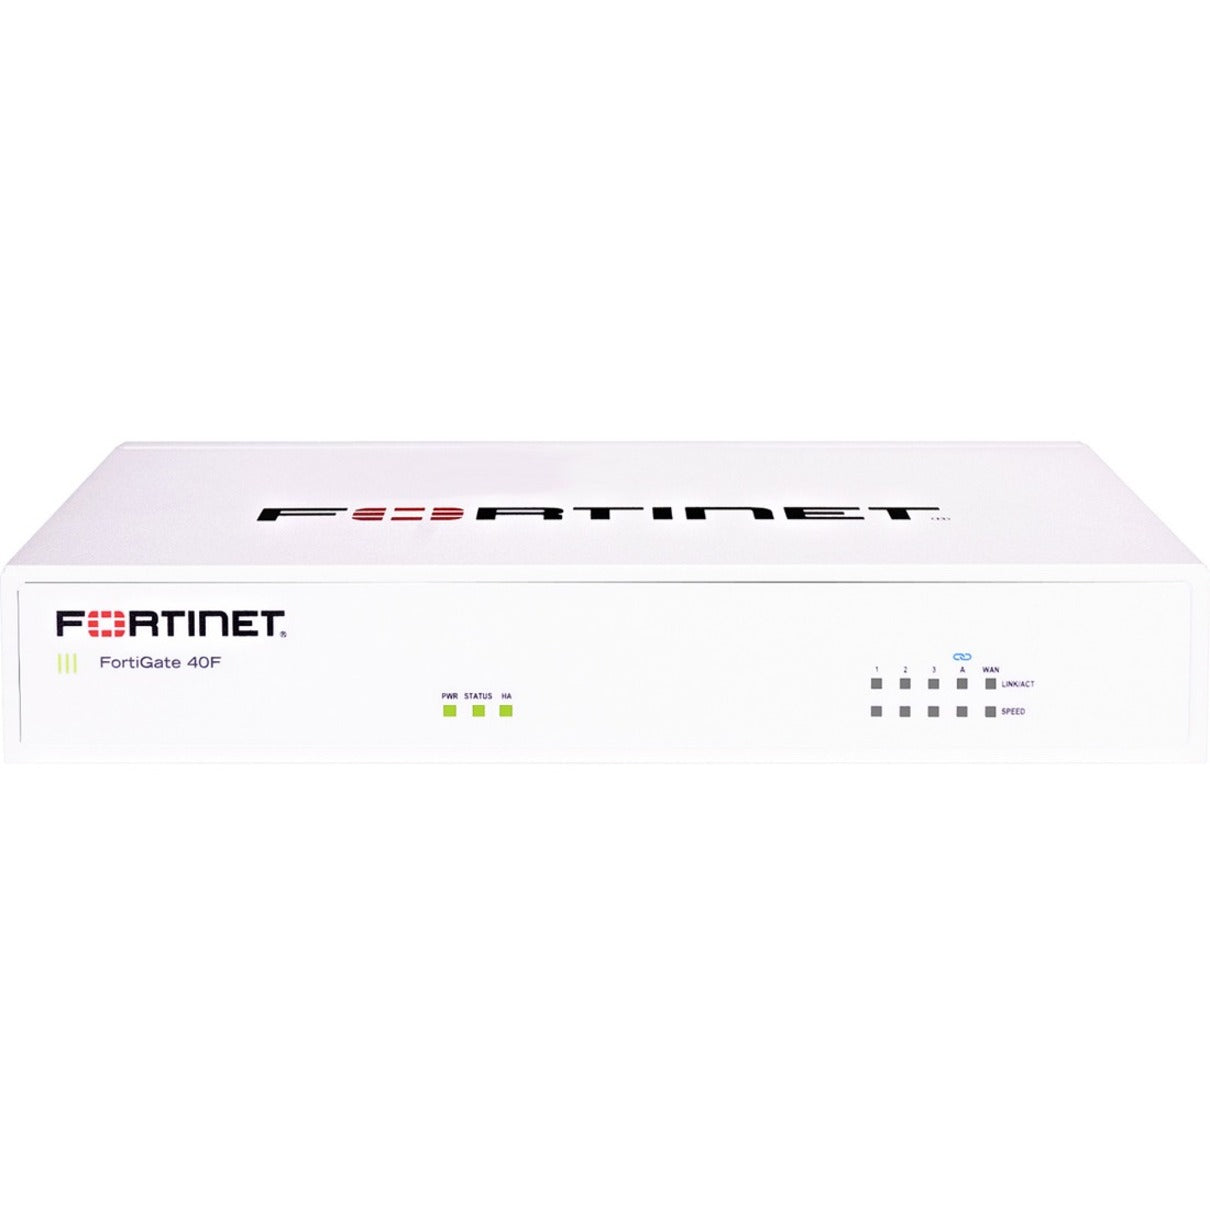 Fortinet FG-40F-BDL-950-36 FortiGate Network Security/Firewall Appliance, 3 Year Warranty, TAA Compliant